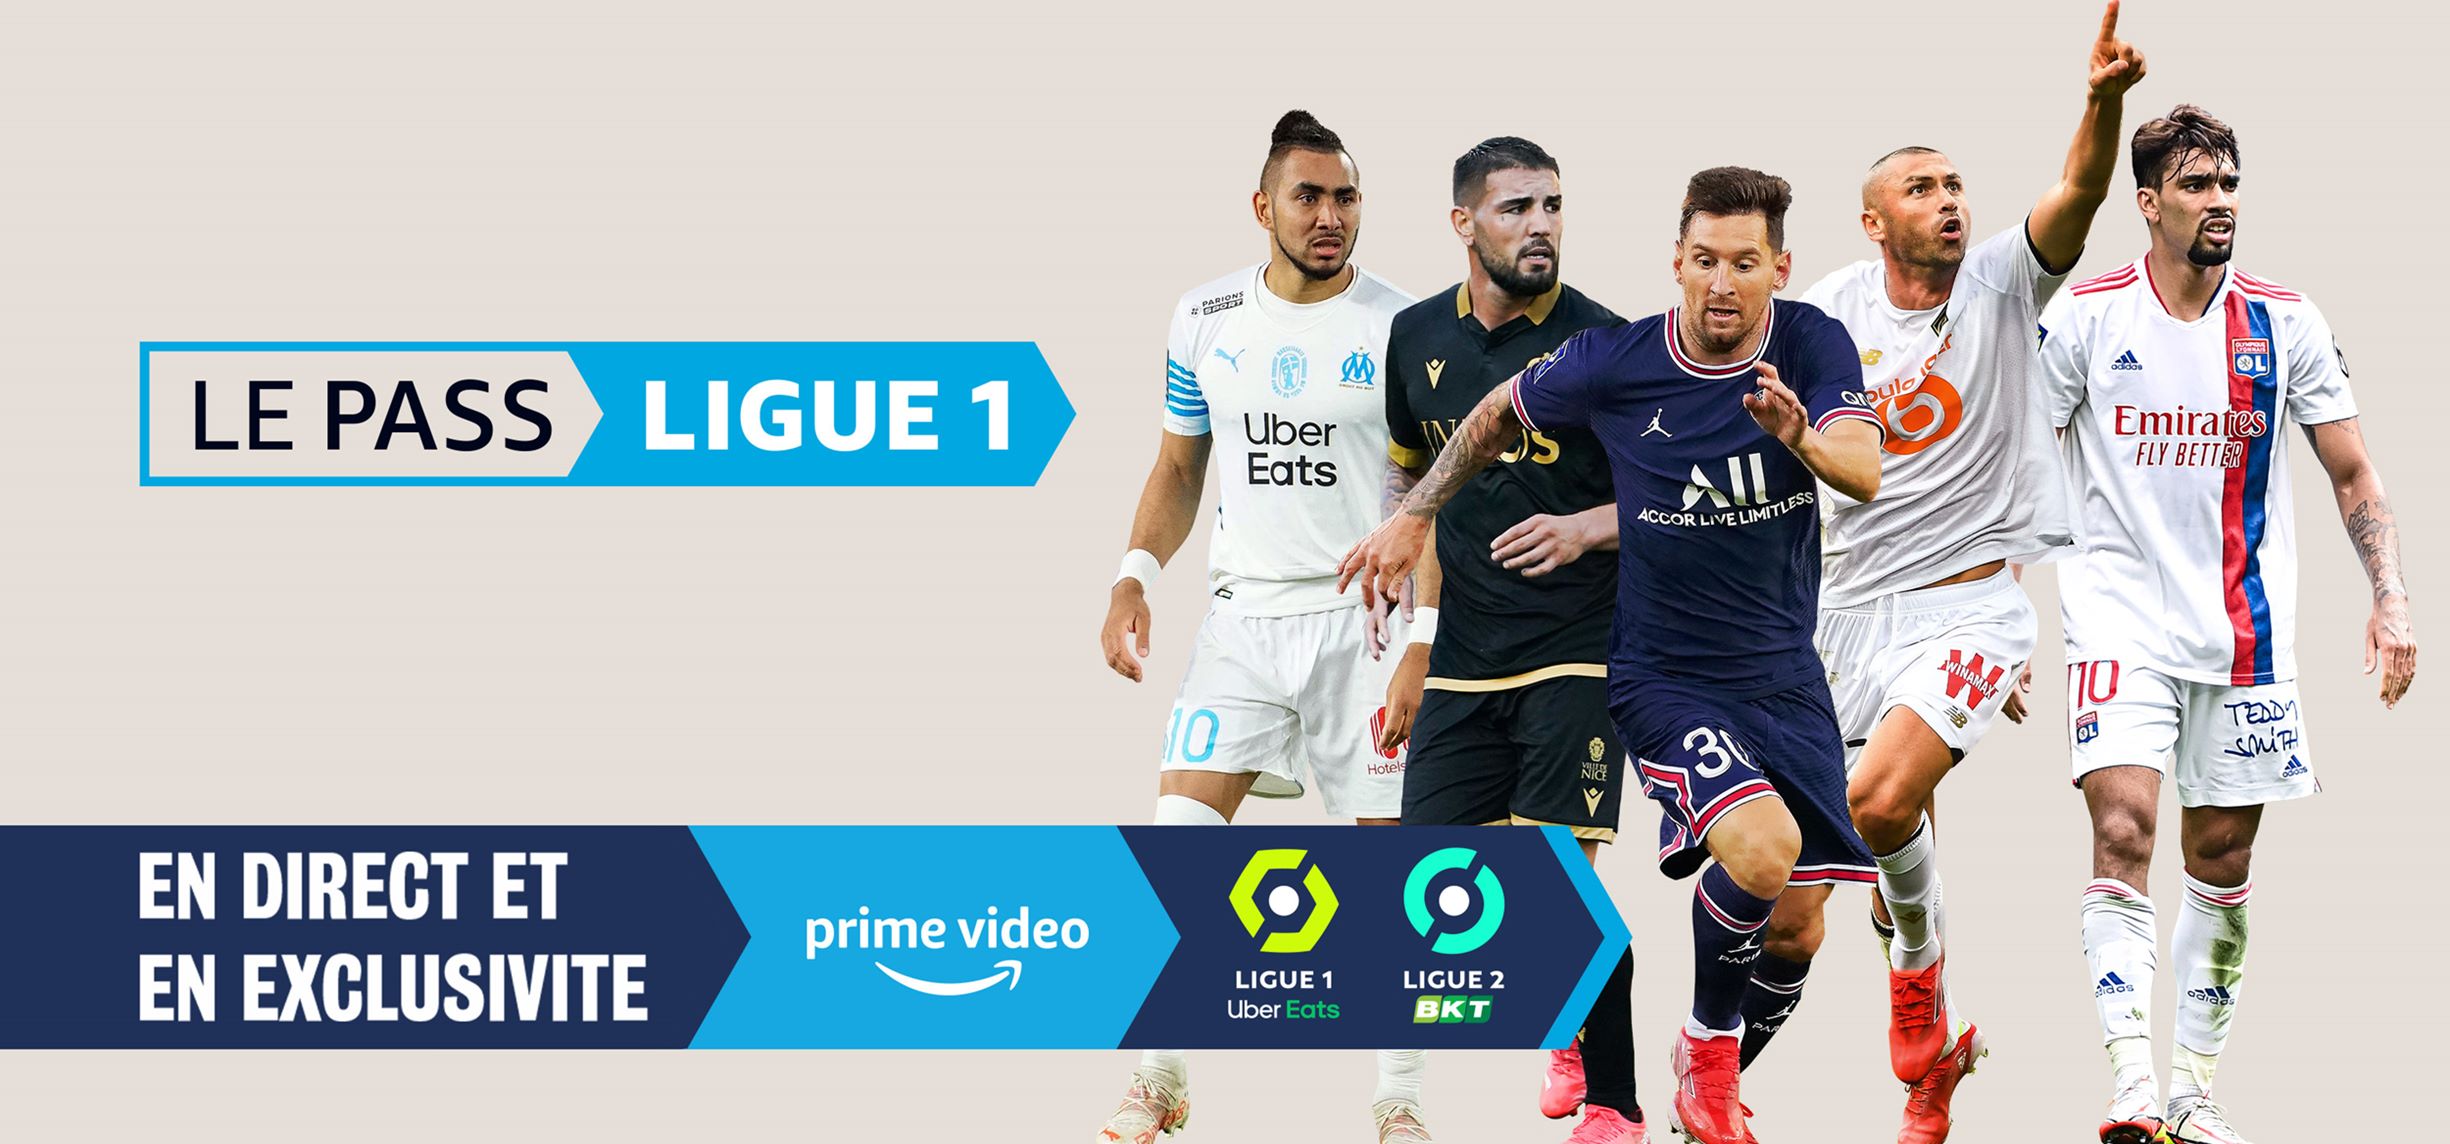 How To Watch Ligue 1 On Amazon Prime